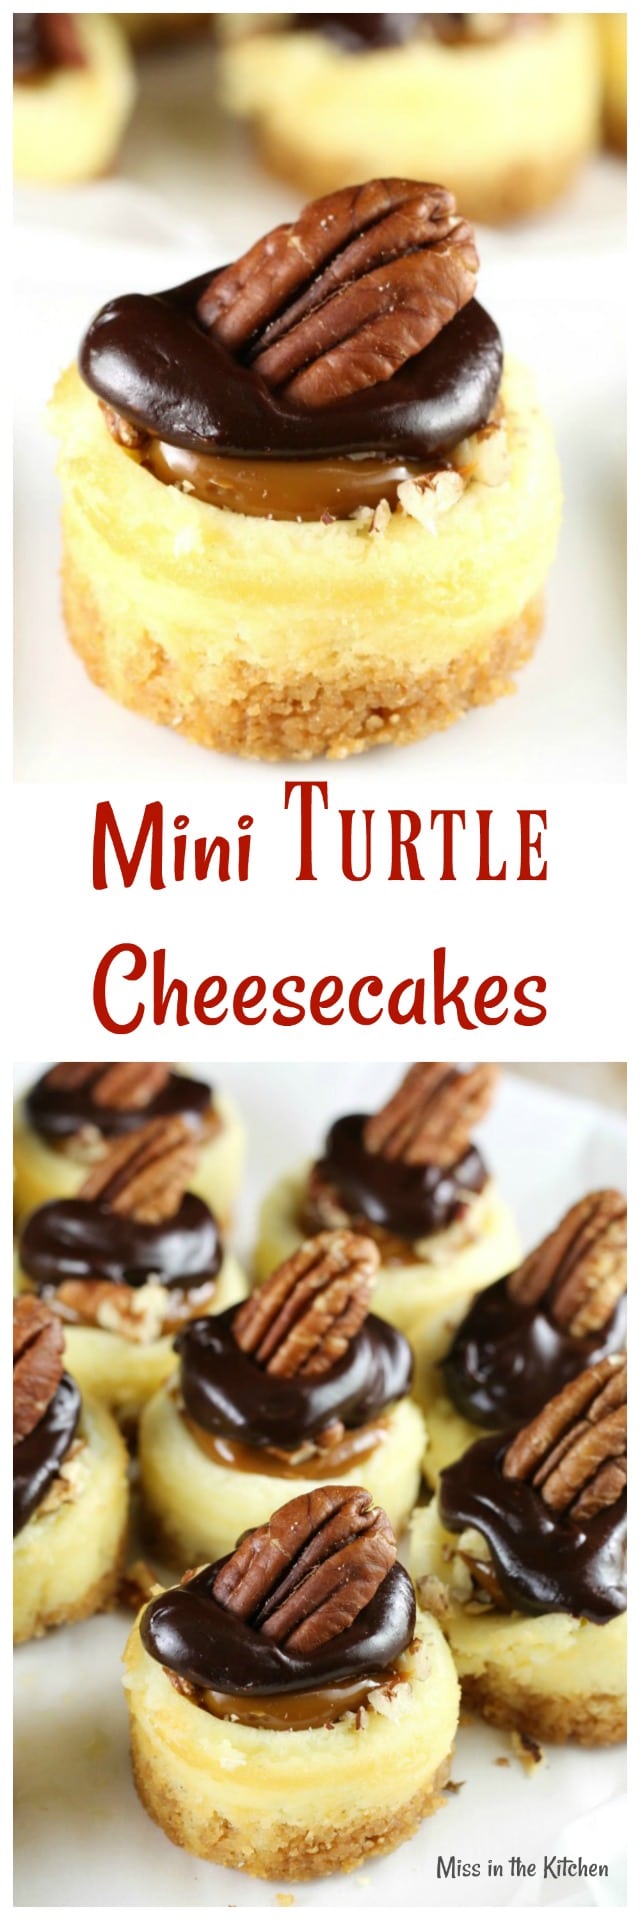 Mini Turtle Cheesecakes Recipe ~ Easy dessert for holidays and celebrations from MissintheKitchen.com #ad